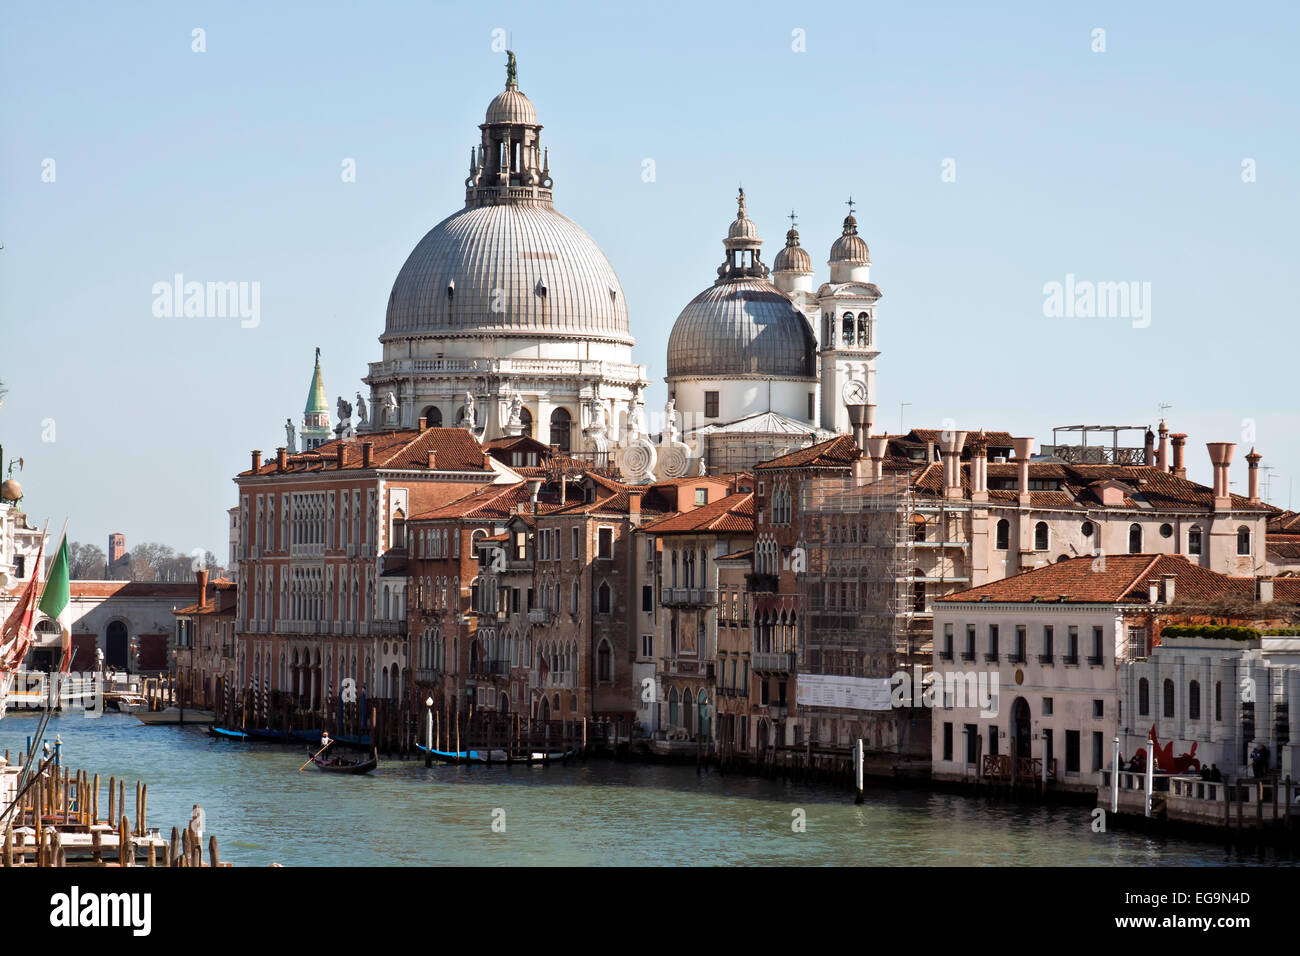 Venice, Italy-February 24, 2014:Grand Canal and Basilica Santa Maria della Salute.The Grand Canal is a canal in Venice, Italy. I Stock Photo